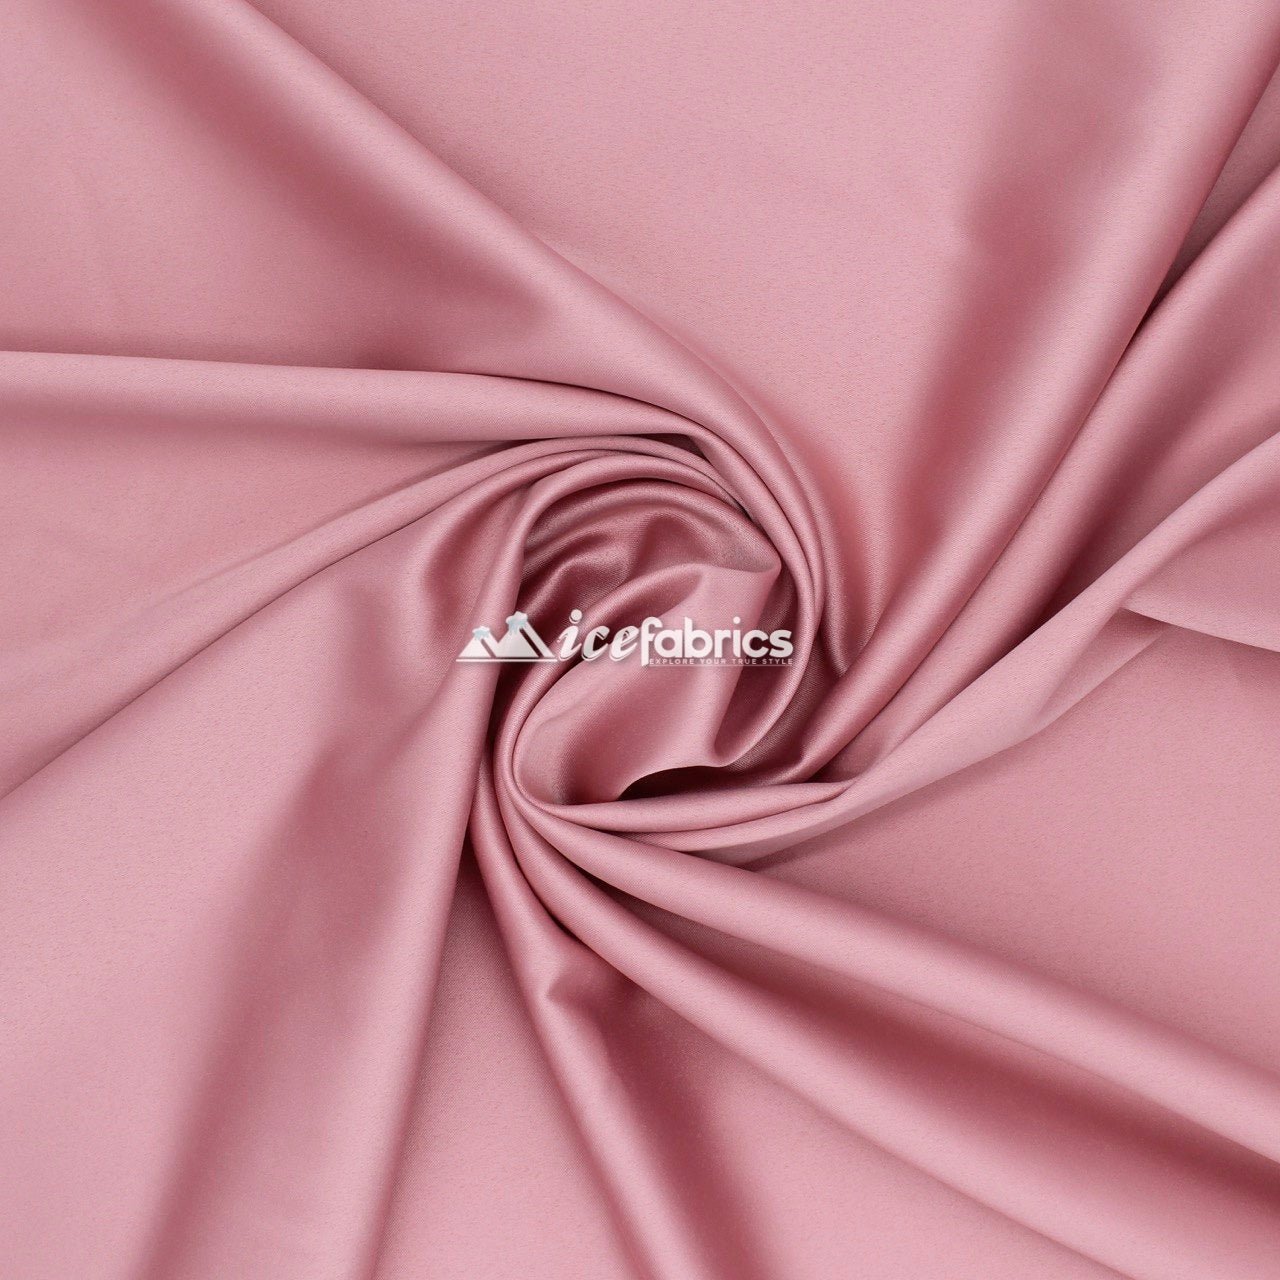 Armani Thick Solid Color Silky Stretch Satin Fabric Sold By The YardSatin FabricICE FABRICSICE FABRICSRose GoldArmani Thick Solid Color Silky Stretch Satin Fabric Sold By The Yard ICE FABRICS Mauve